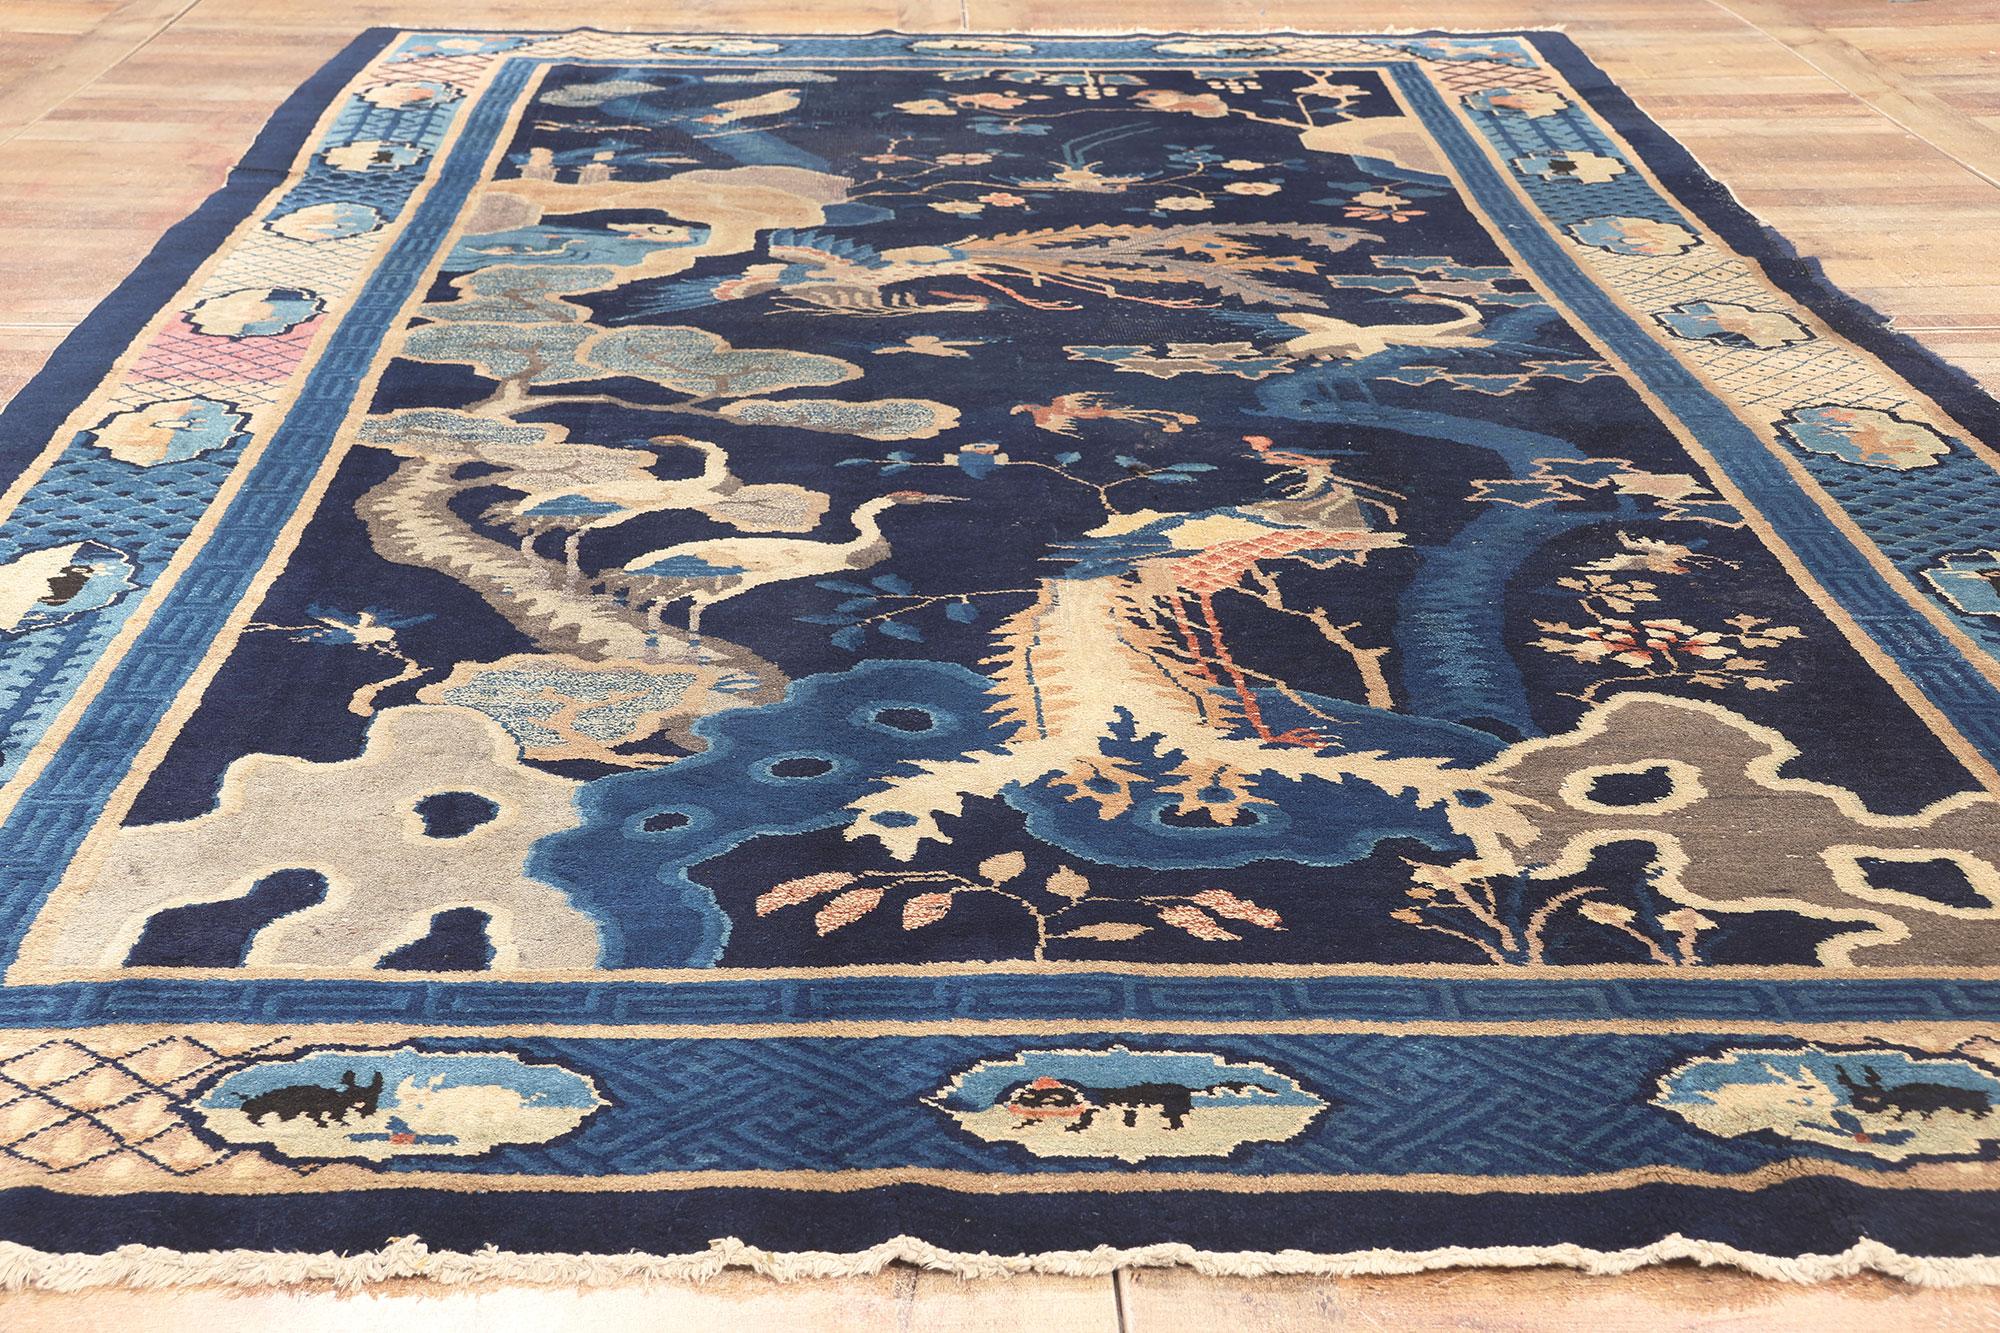 20th Century Antique Chinese Pictorial Rug, Bai Niao Chao Feng, Birds Saluting the Phoenix For Sale